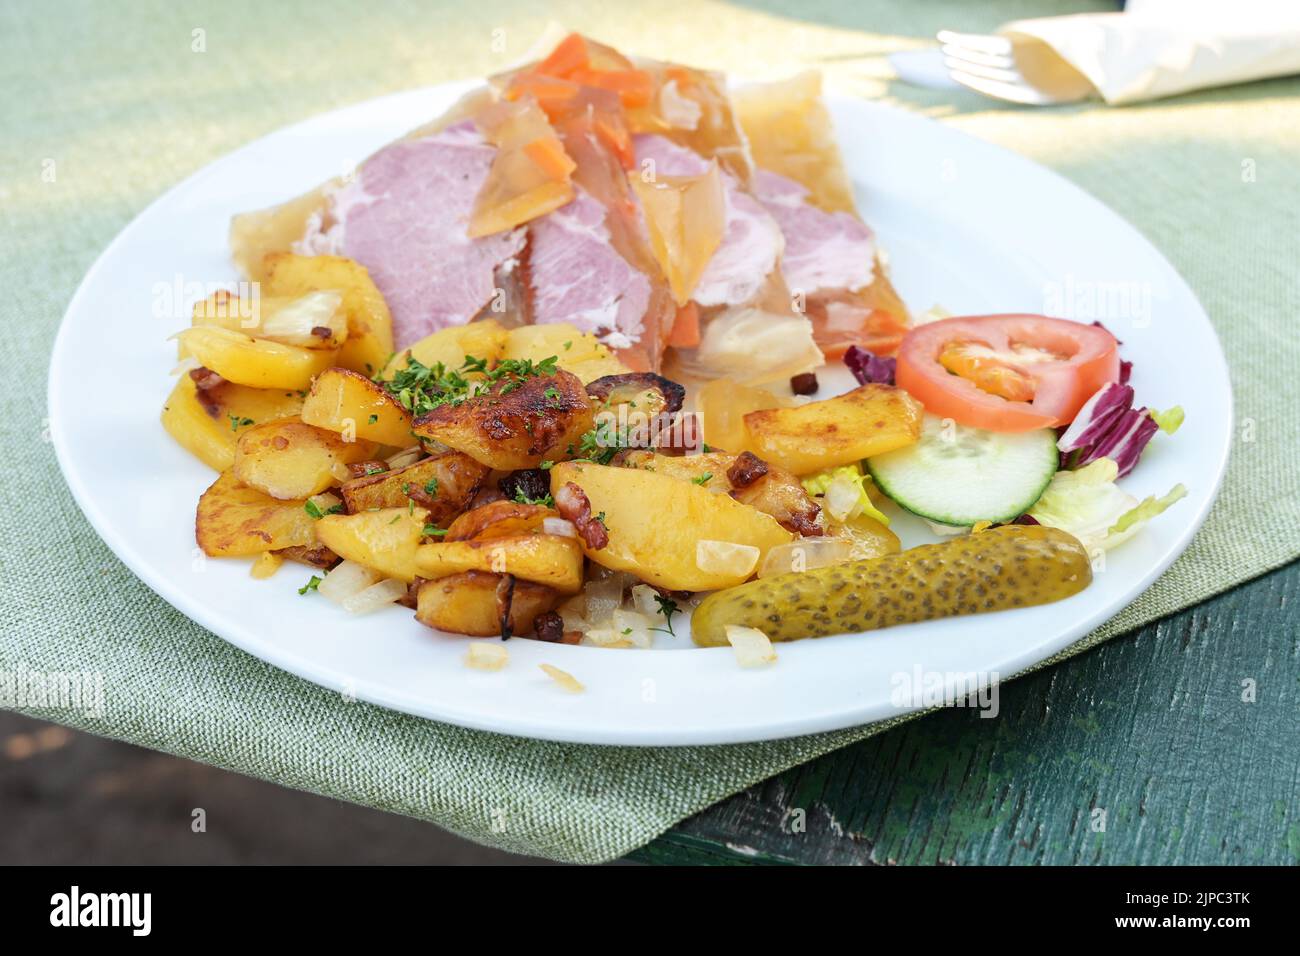 Fried potatoes or german fries with sauerfleisch (soured and pickled meat in jelly), traditional dish in Germany and Austria served on a white plate, Stock Photo